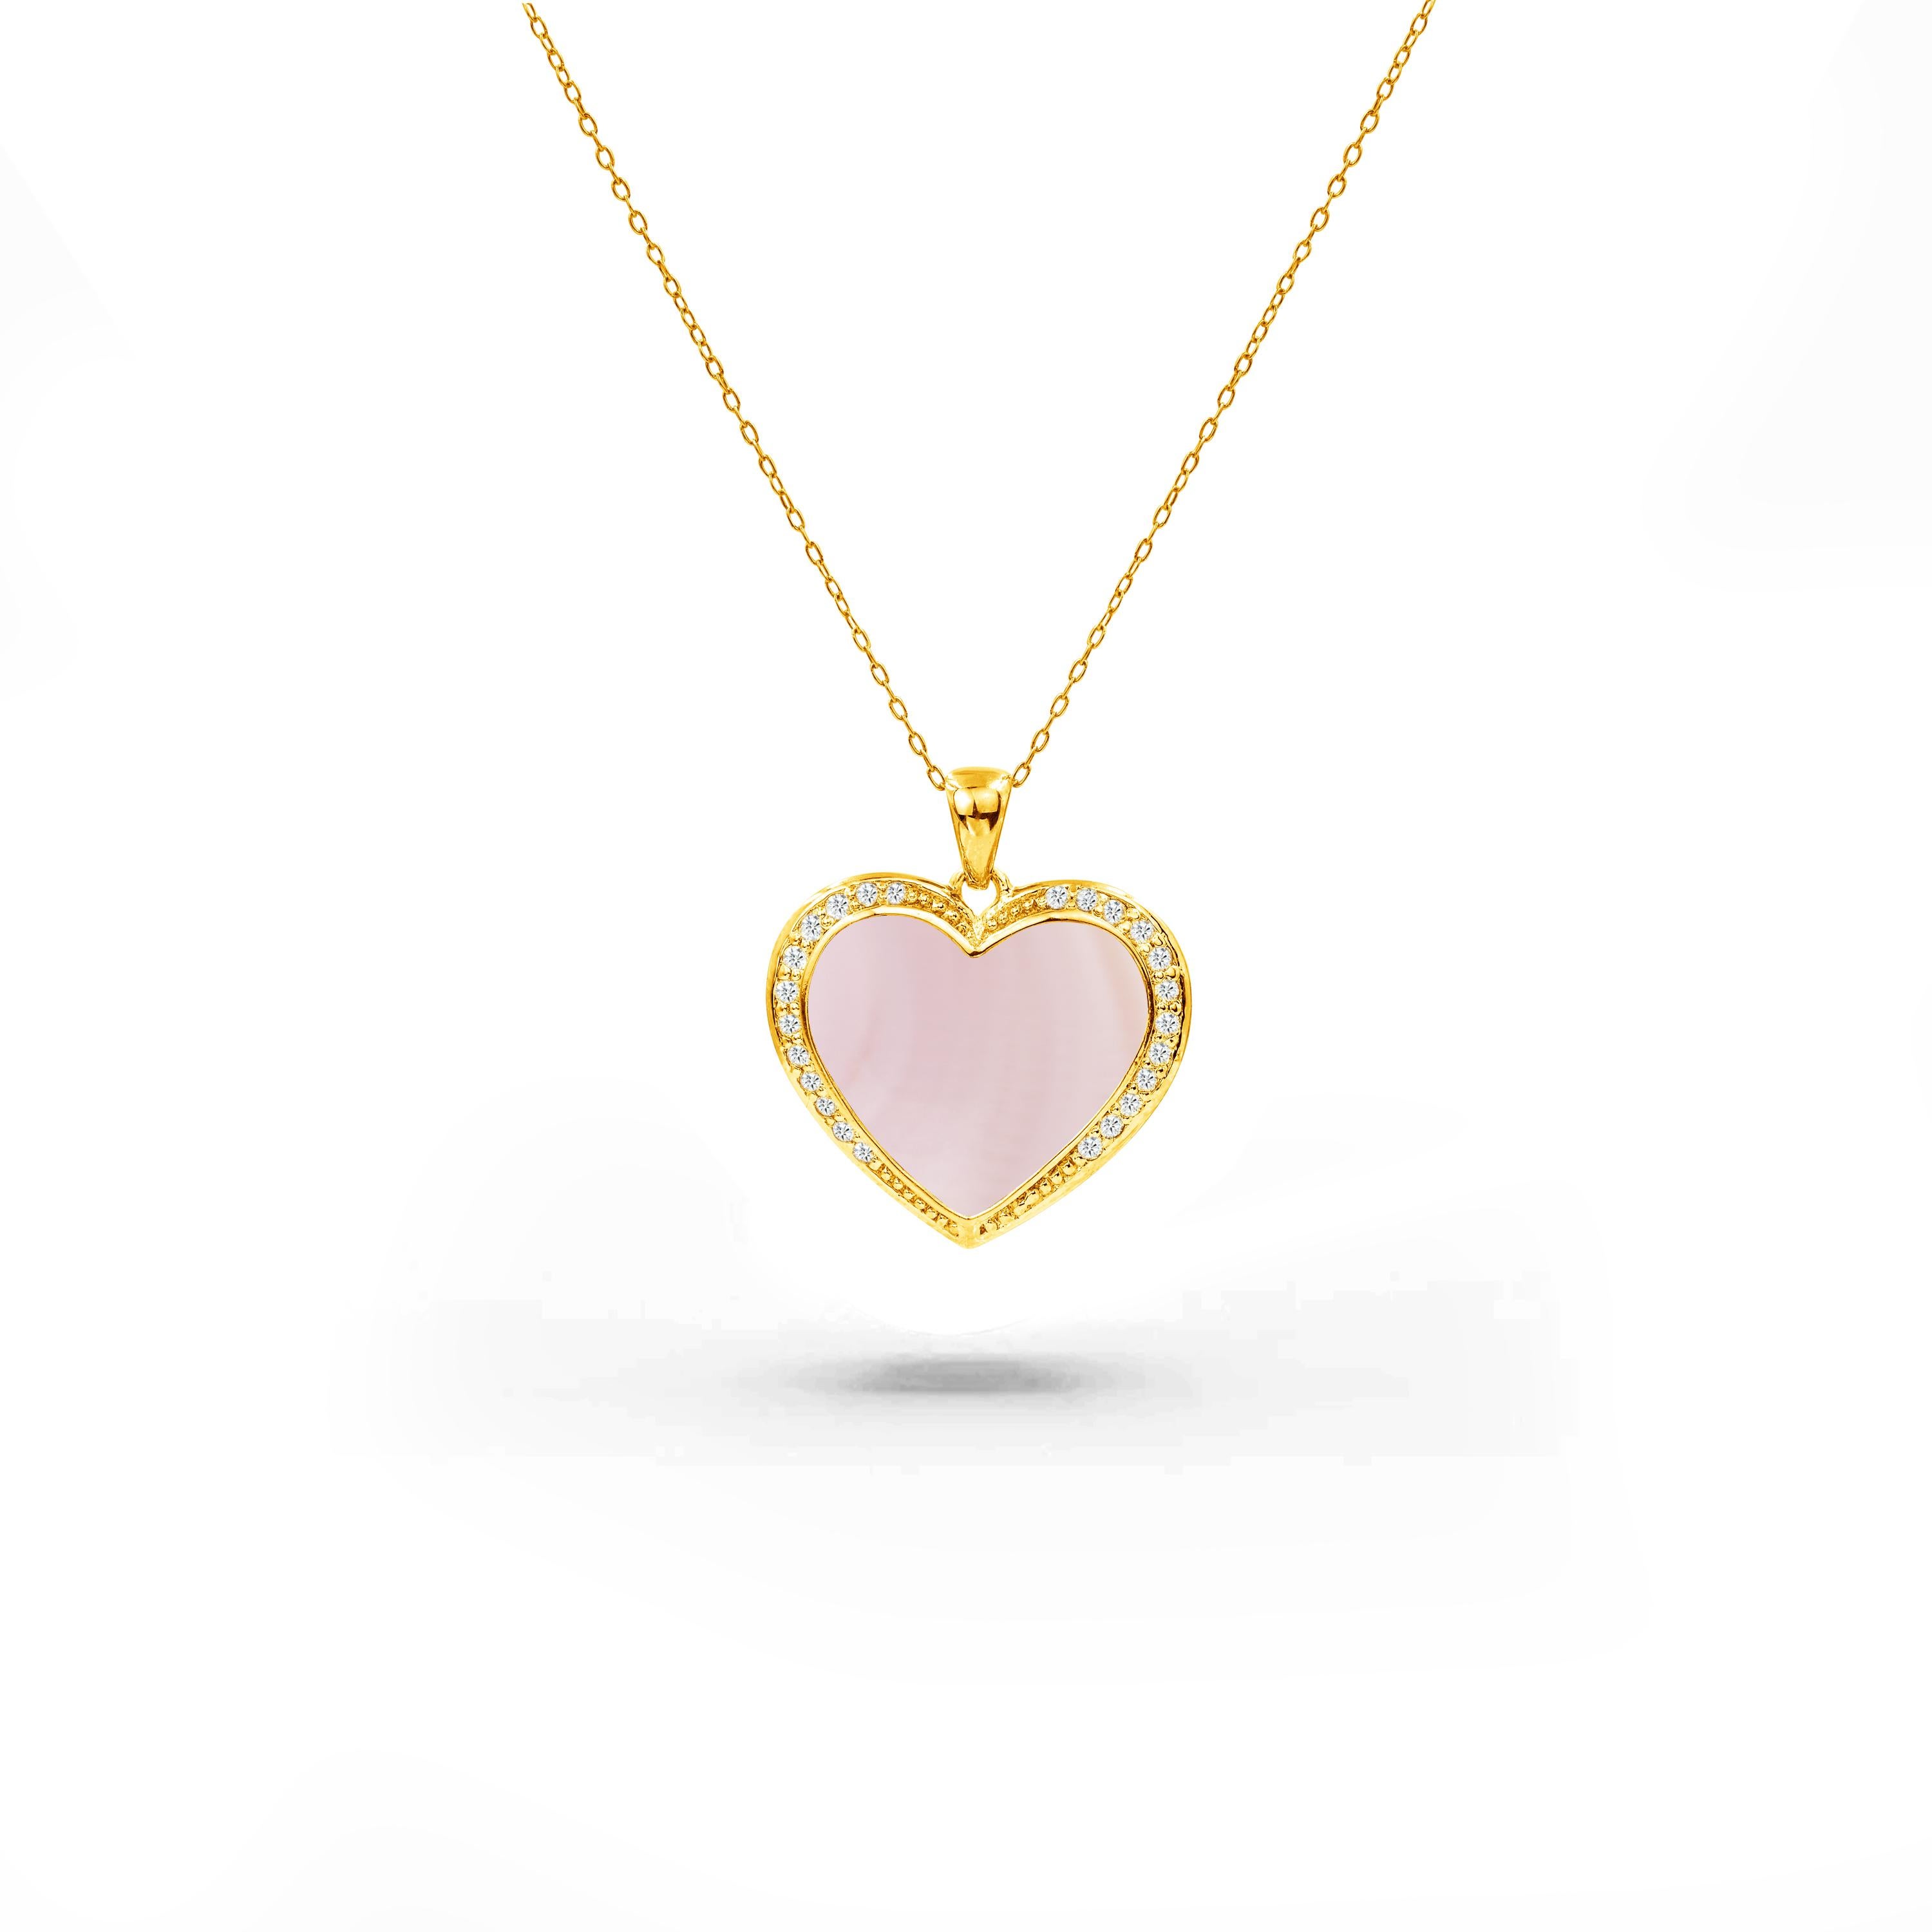 This exquisite necklace showcases the natural beauty of the gemstone within a heart-shaped pendant, creating a harmonious blend of sophistication and sentiment that will leave you captivated. This necklace can be customized with gemstones like Black